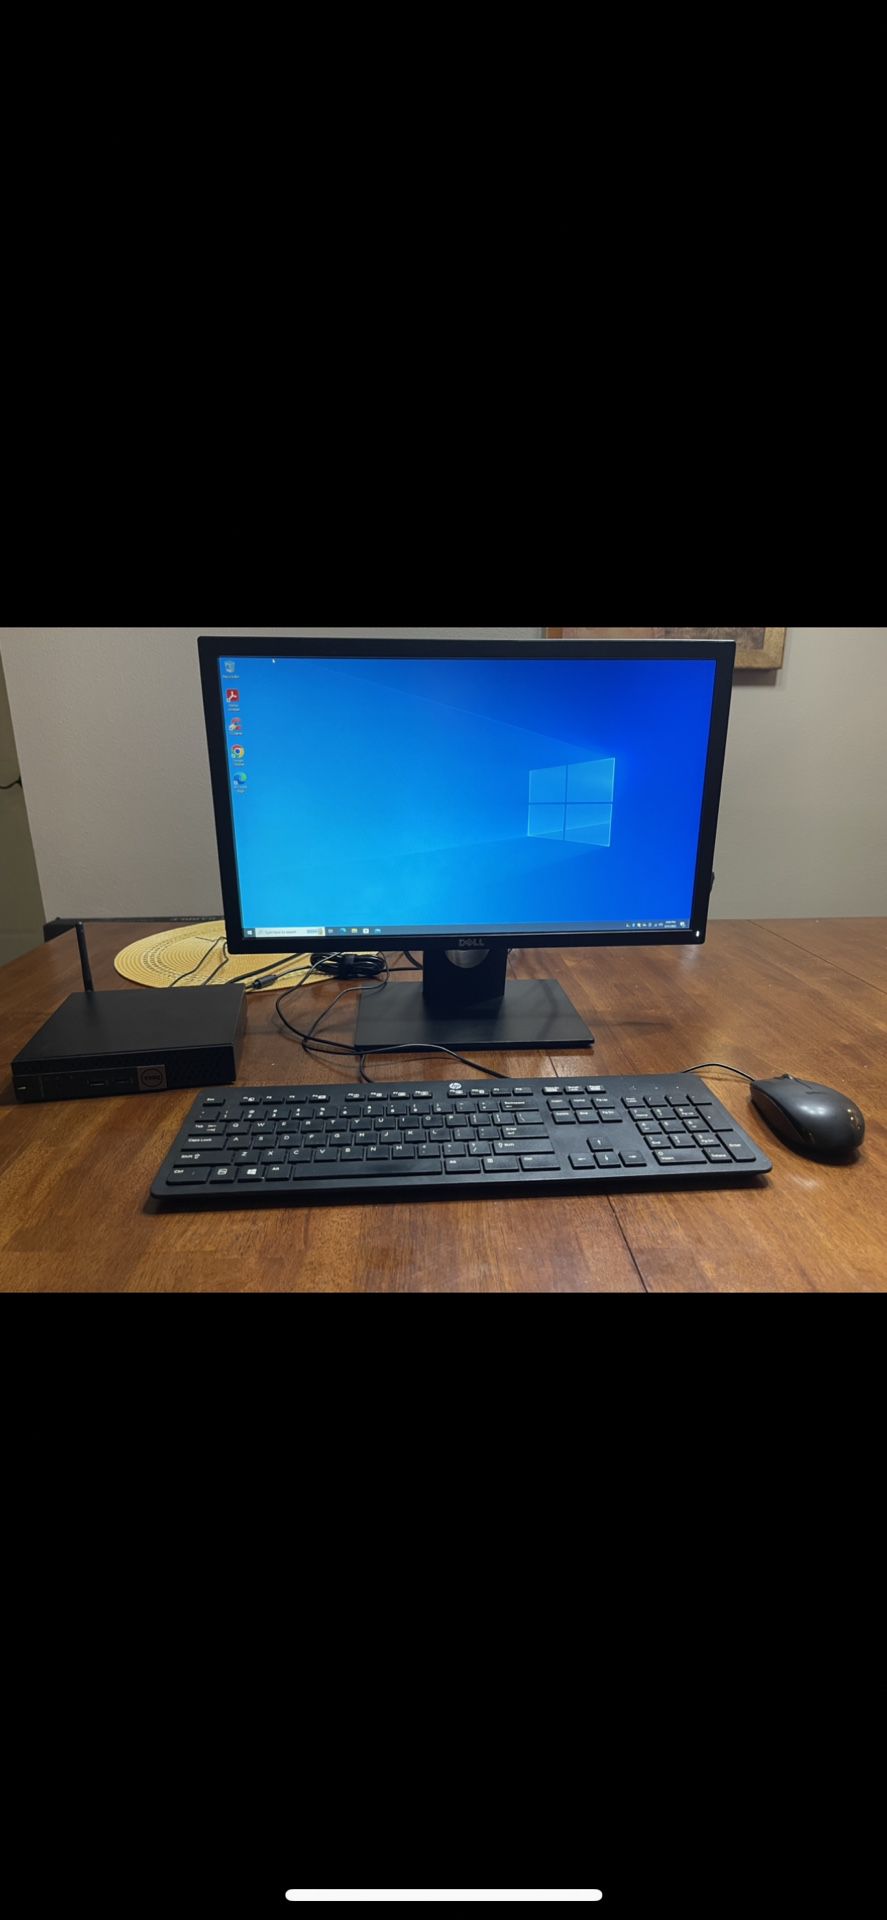 Dell Desktop Computer - Includes Monitor Keyboard Mouse Same OS On Tablets And Laptops 